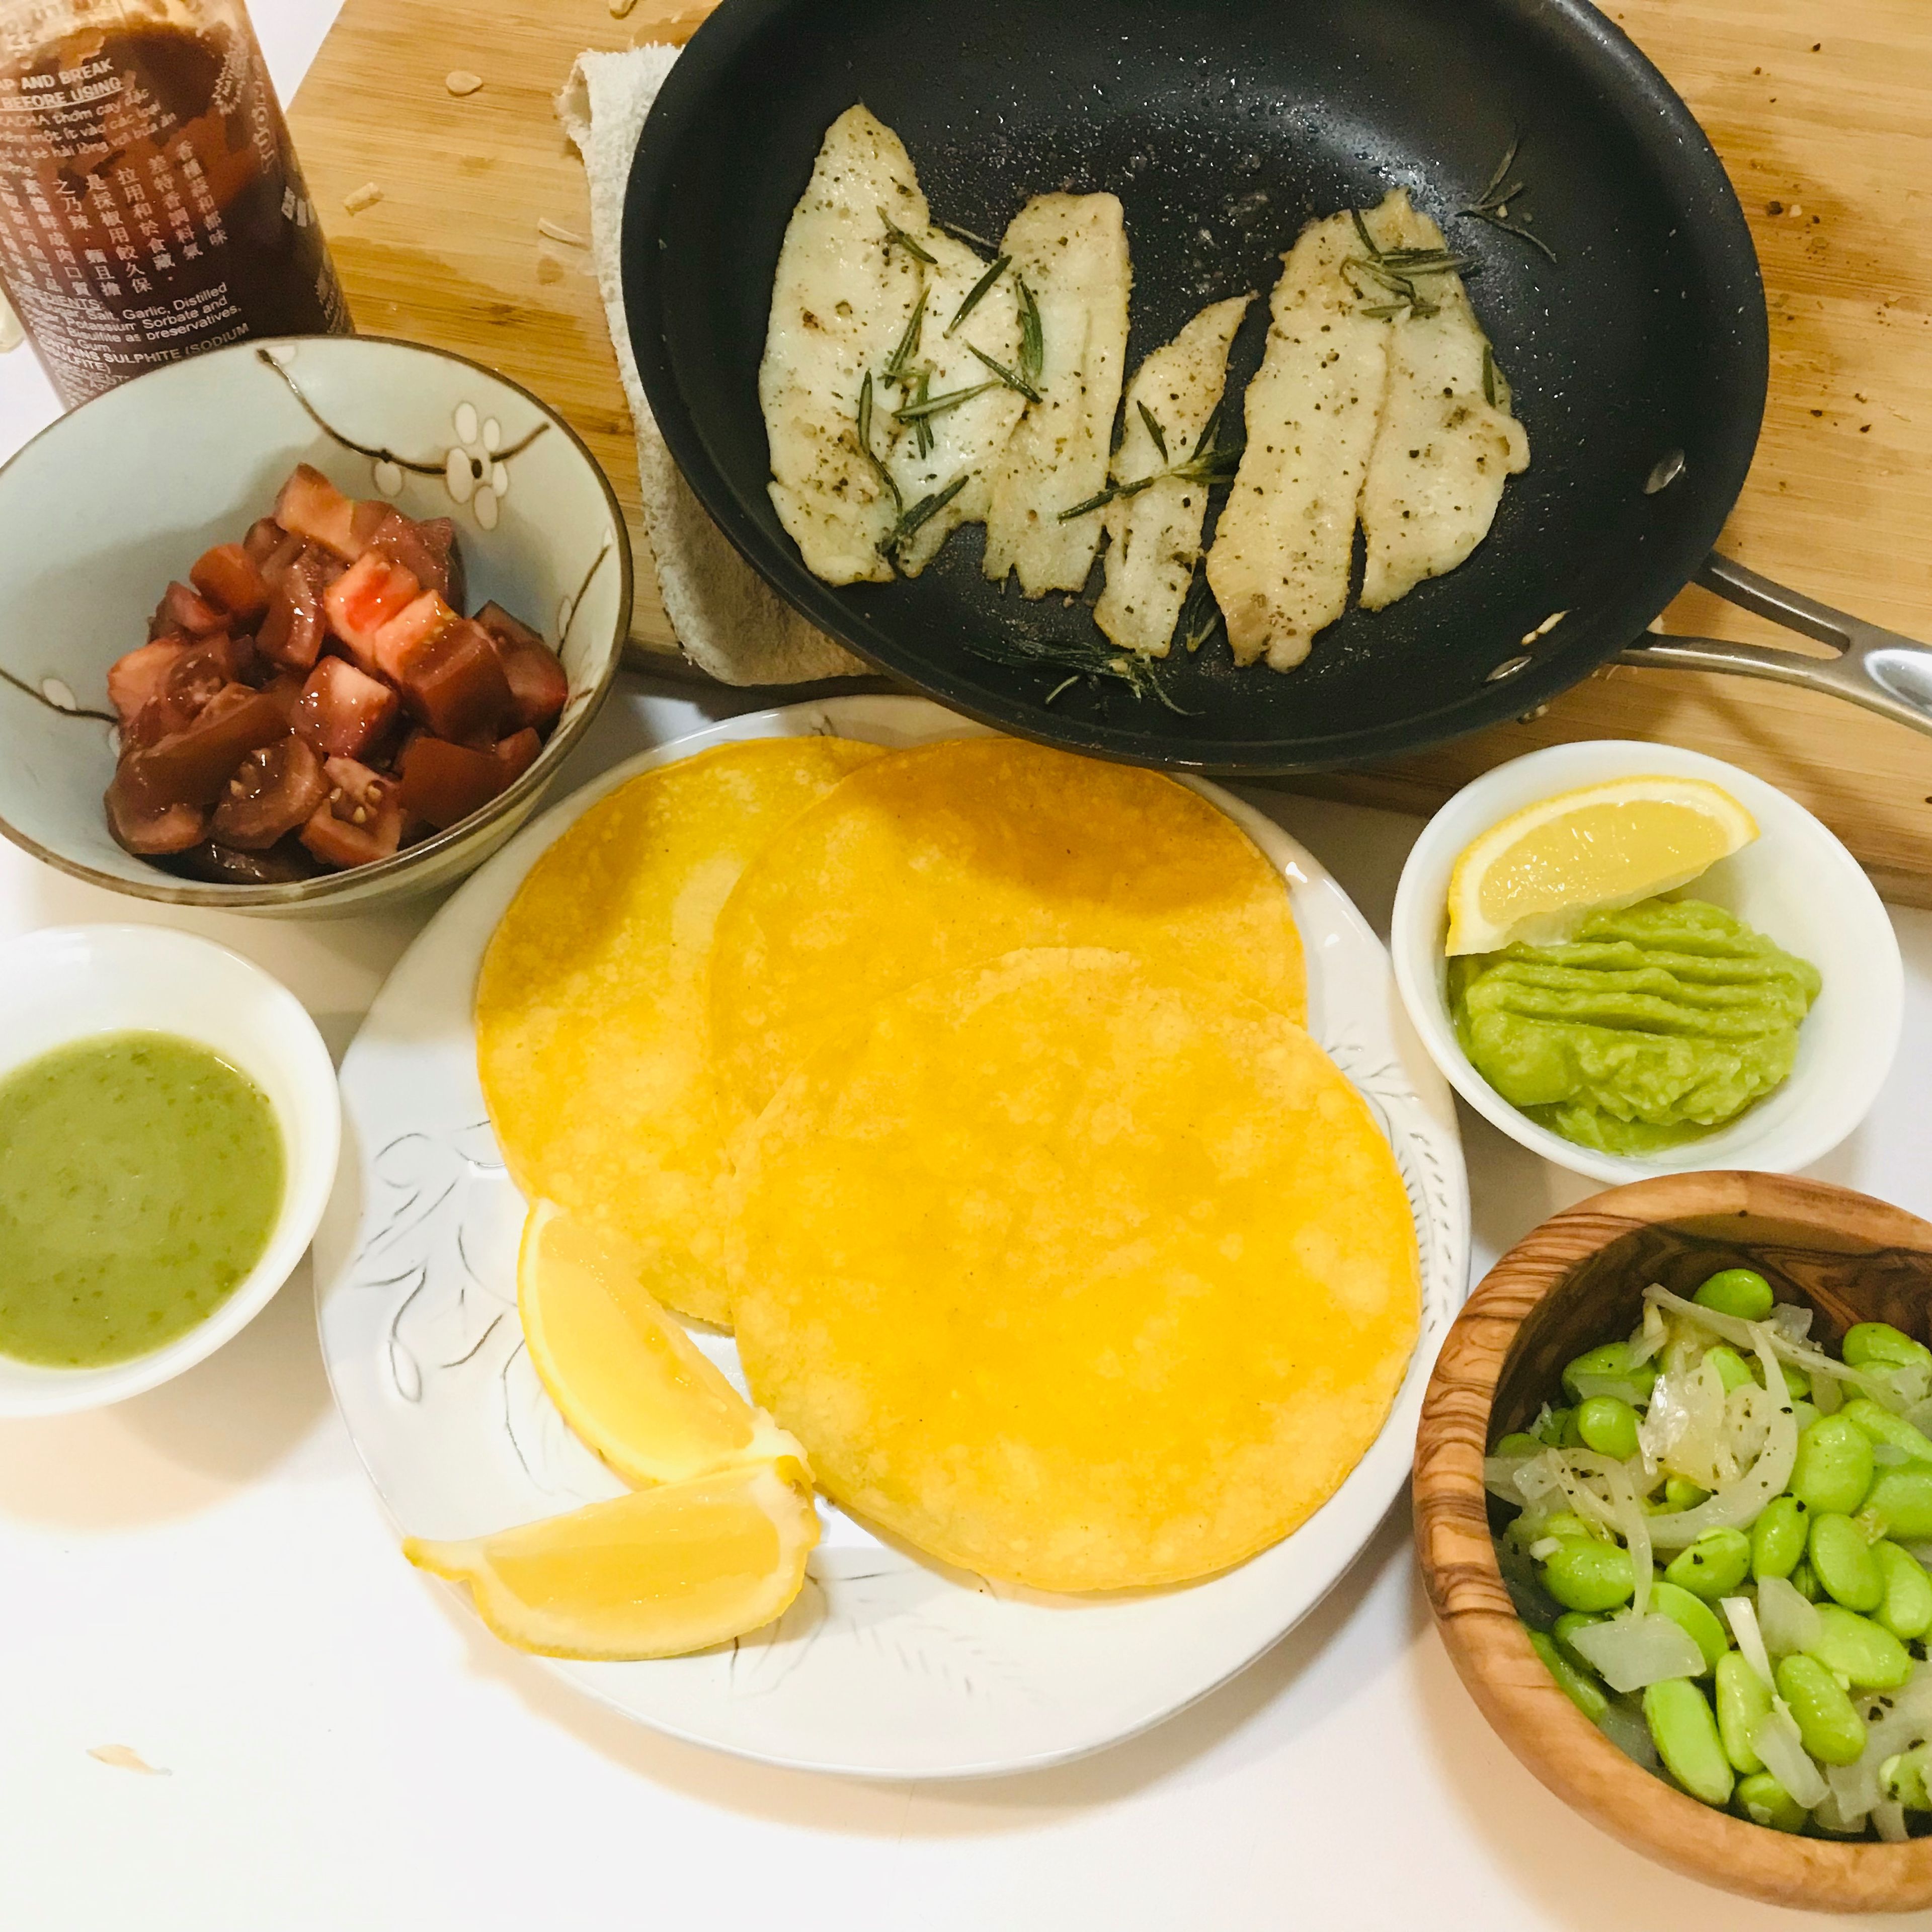 Assemble the taco! Put one piece of fish, a scoop of sautés edamame, and chopped tomatoes into a tortilla. Add a dollop of mashed avocado and drizzle some sriracha on top. Squeeze more lemon, if desired.